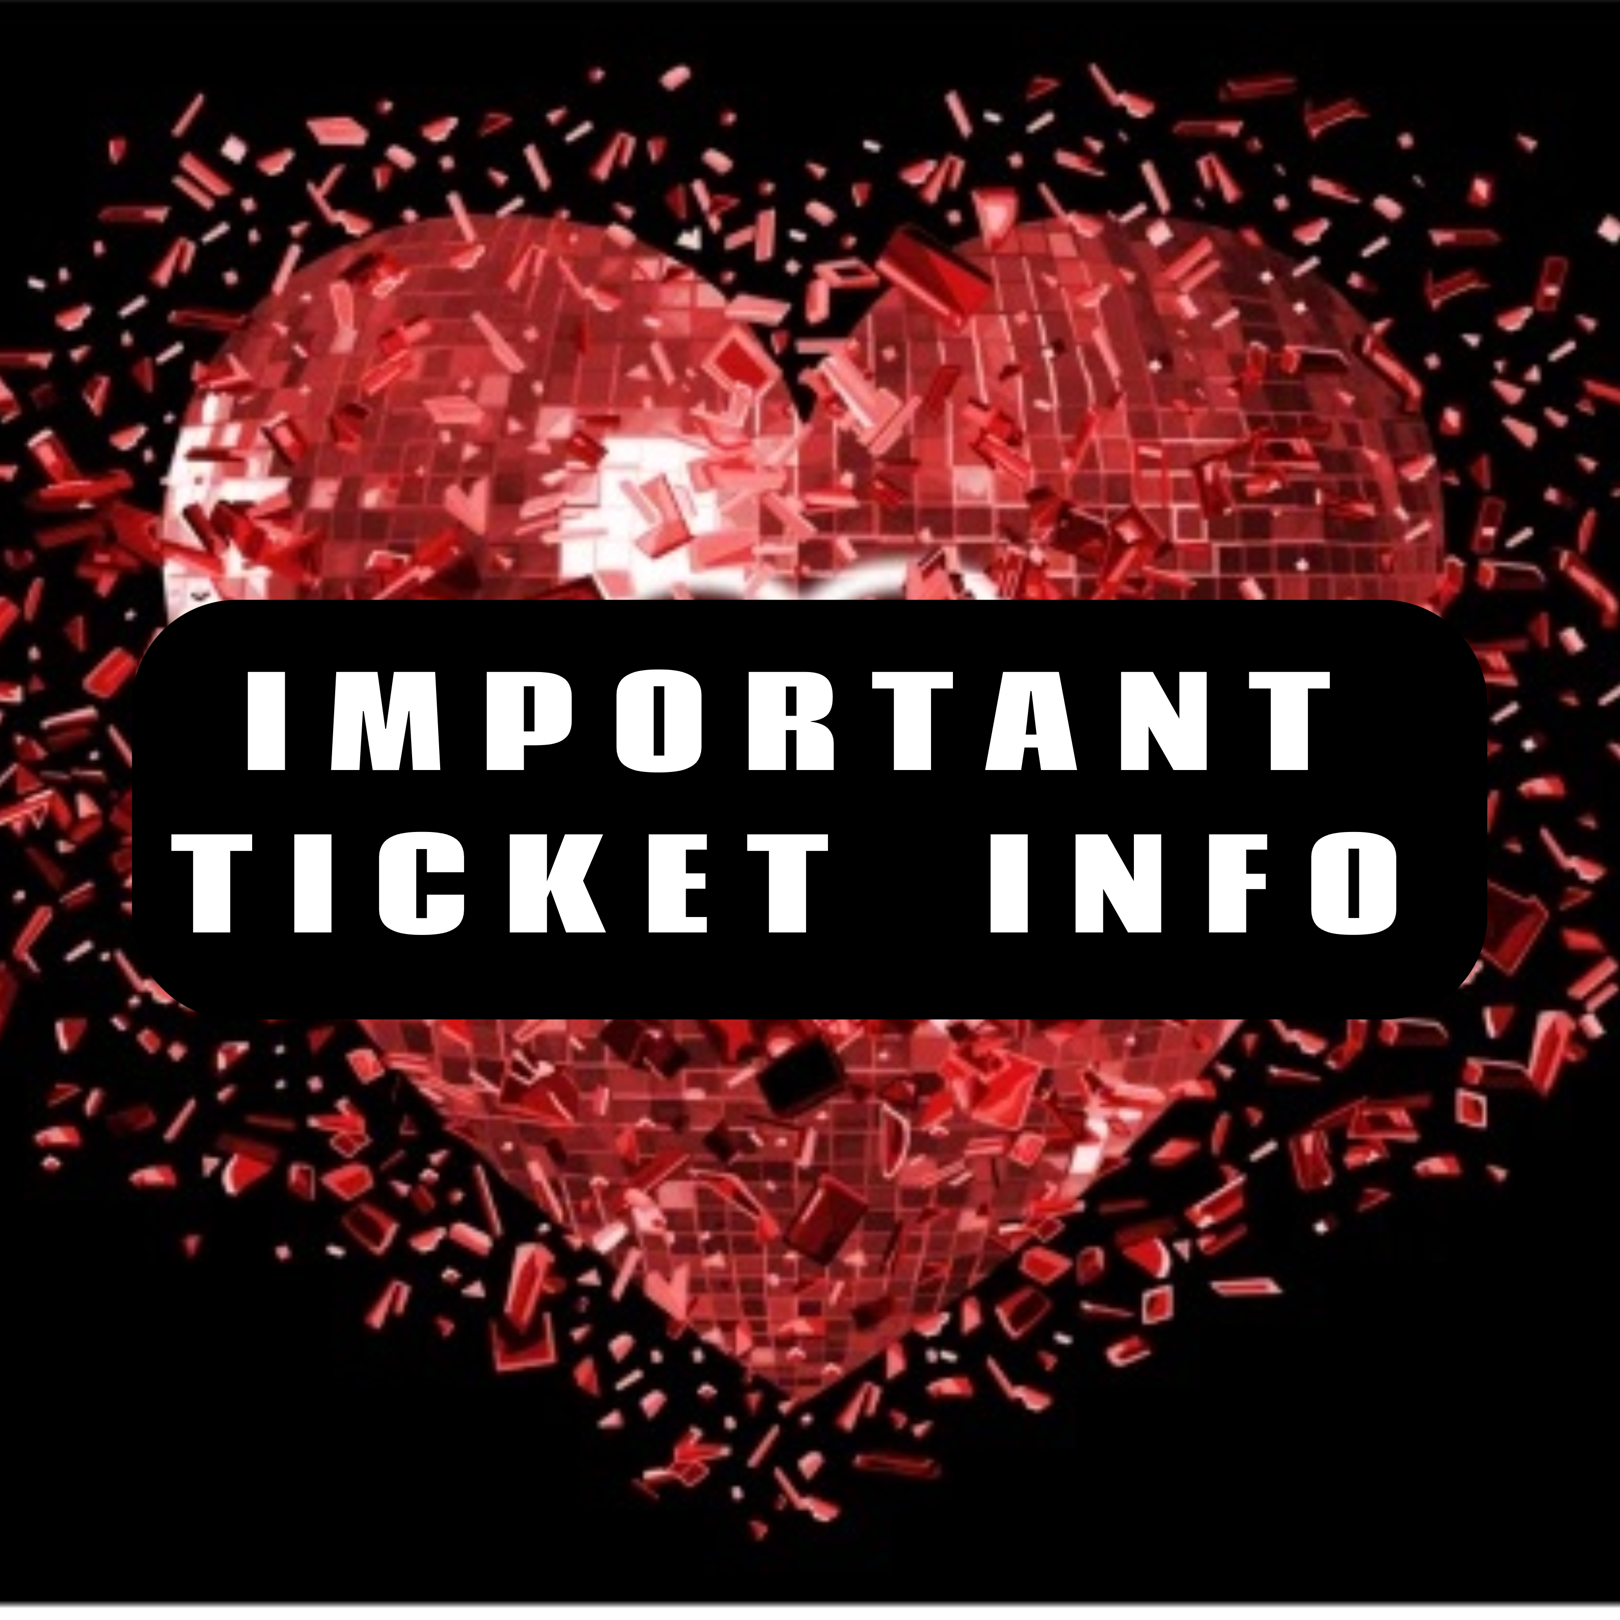 heARTburn: Protect Yourself From Ticket Scams